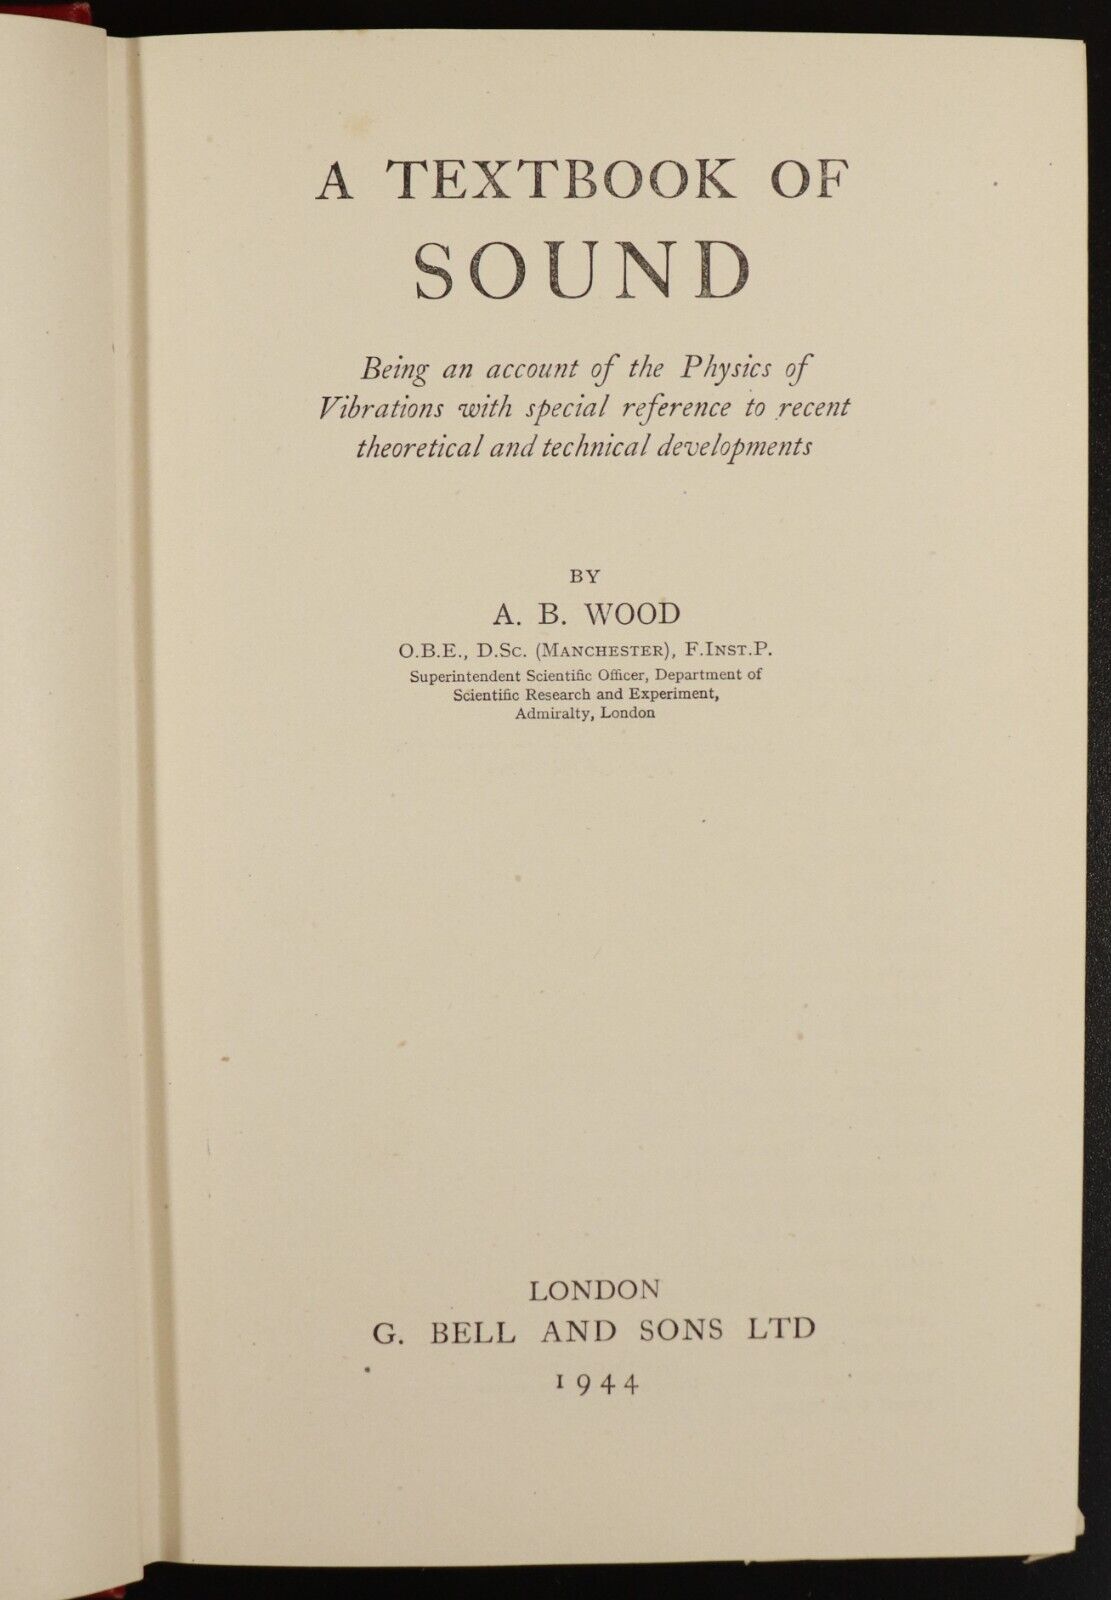 1944 A Text Book Of Sound by A.B. Wood Antique Science Sound Physics Book